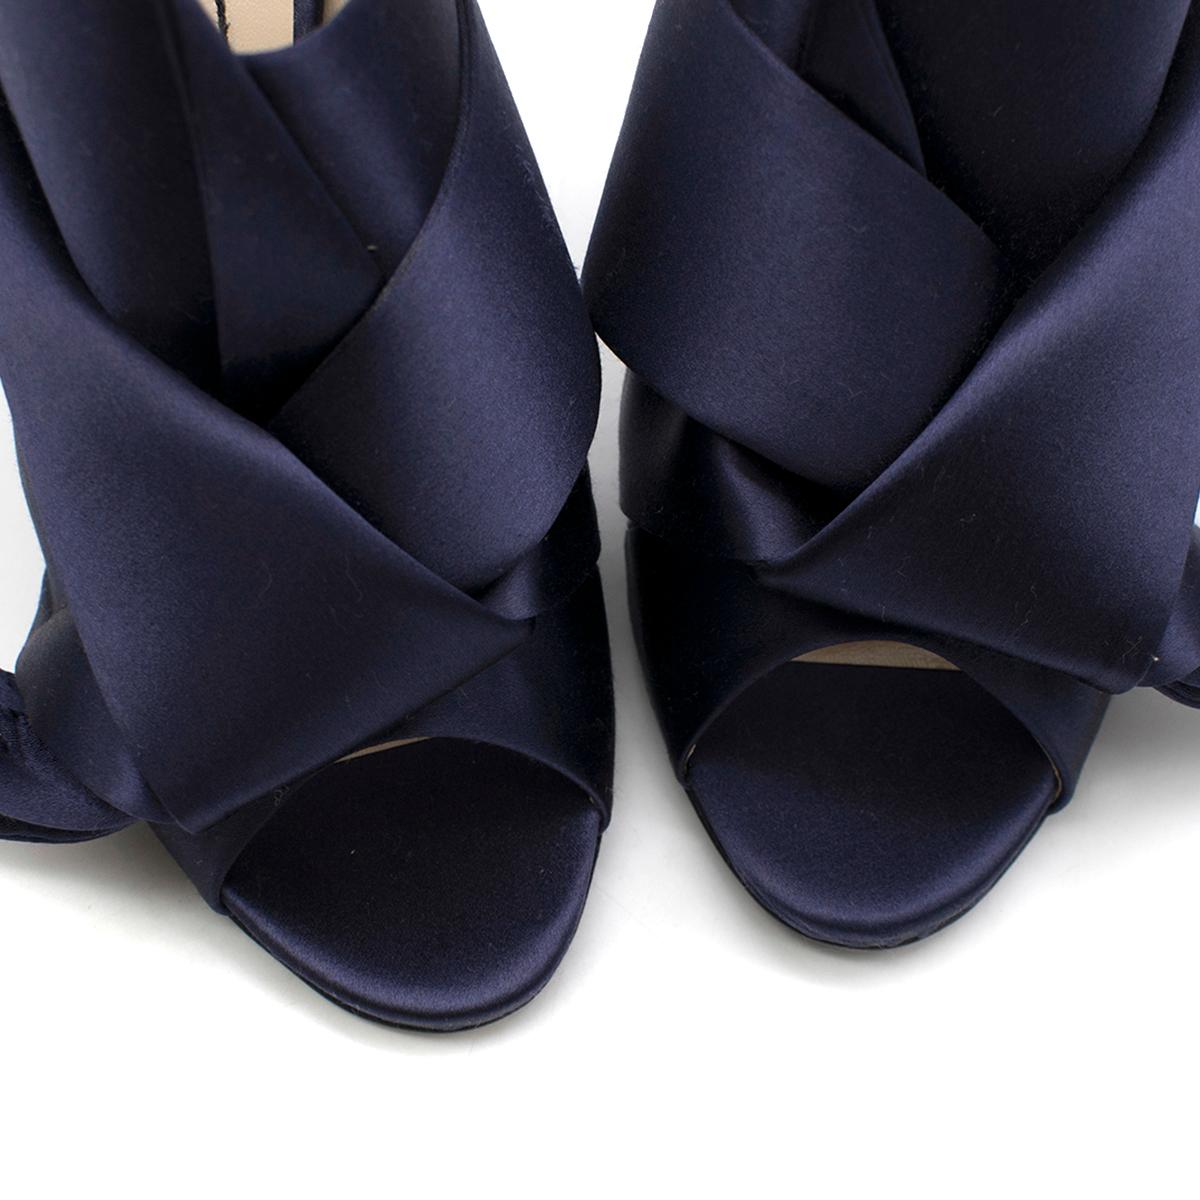 N°21 Navy Satin Bow Mules SIZE 39 1